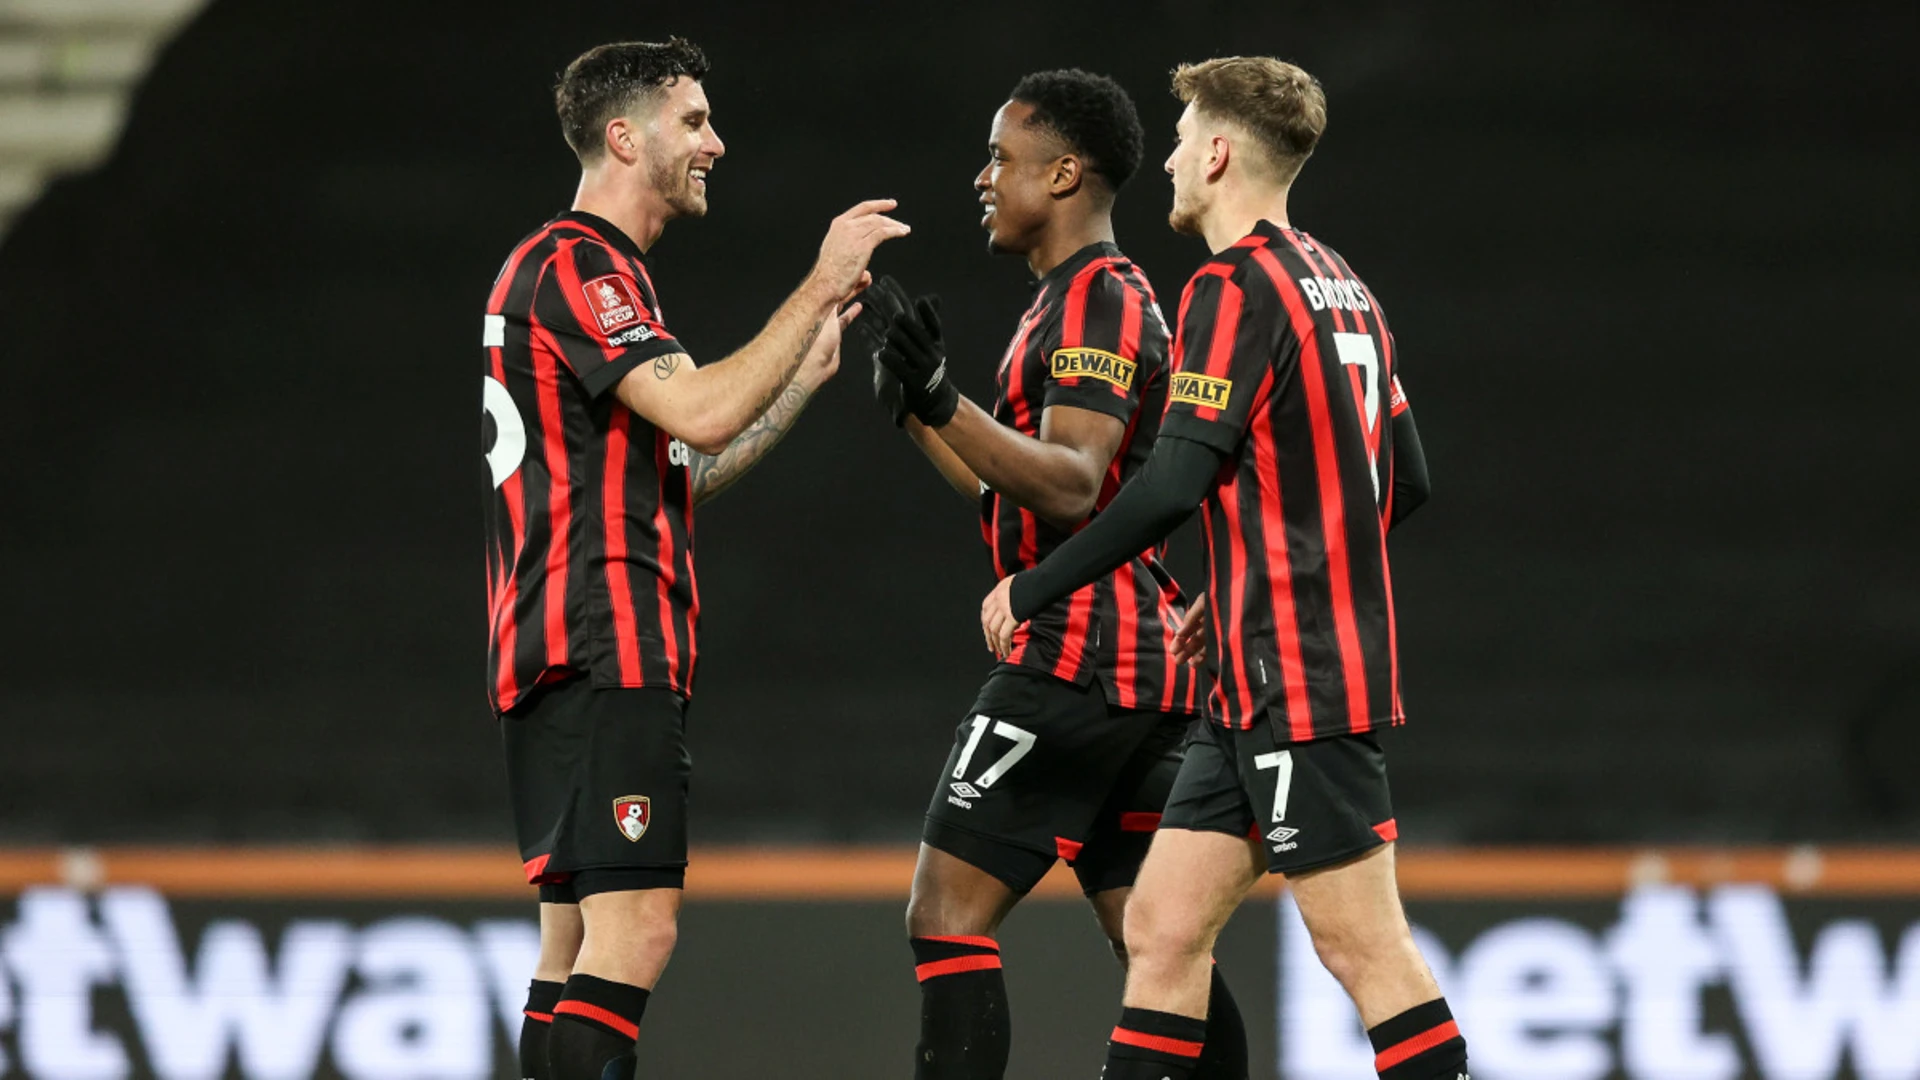 Bournemouth strike early in rout of Swansea